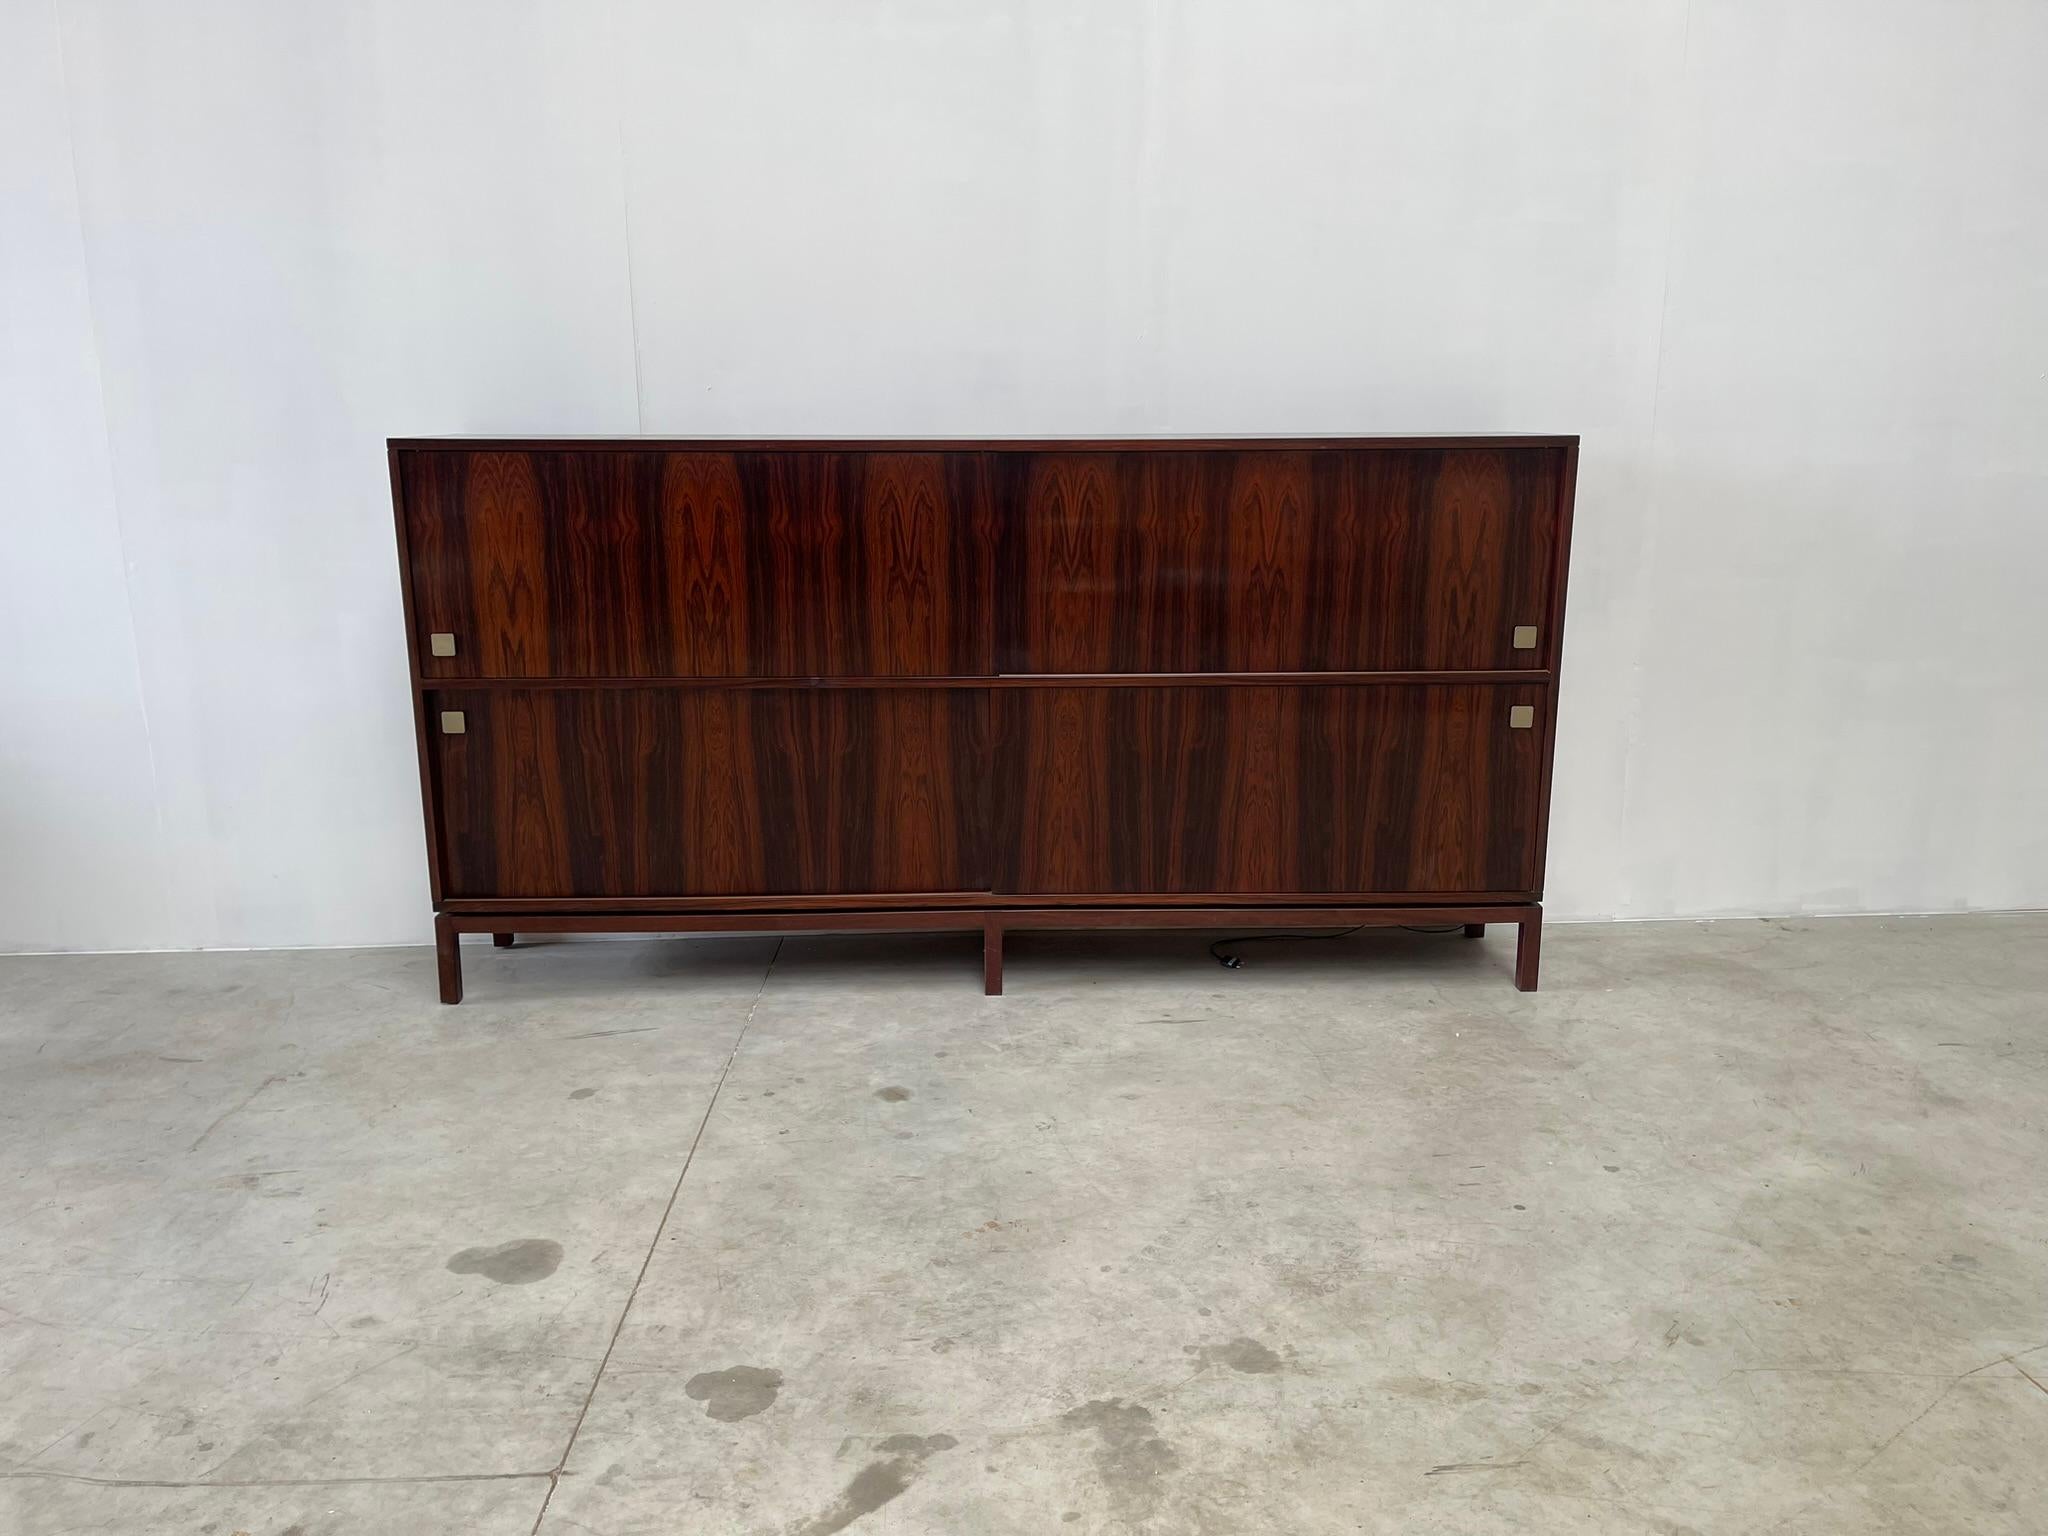 Very large minimalist rosewood highboard designed by Belgian designer Alfred Hendrickx for Belform in the 1960s.

Very spacious highboard  with 4 sliding doors and a bar compartment.

Good condition.

1960s - Belgium

Dimensions:
Lenght: